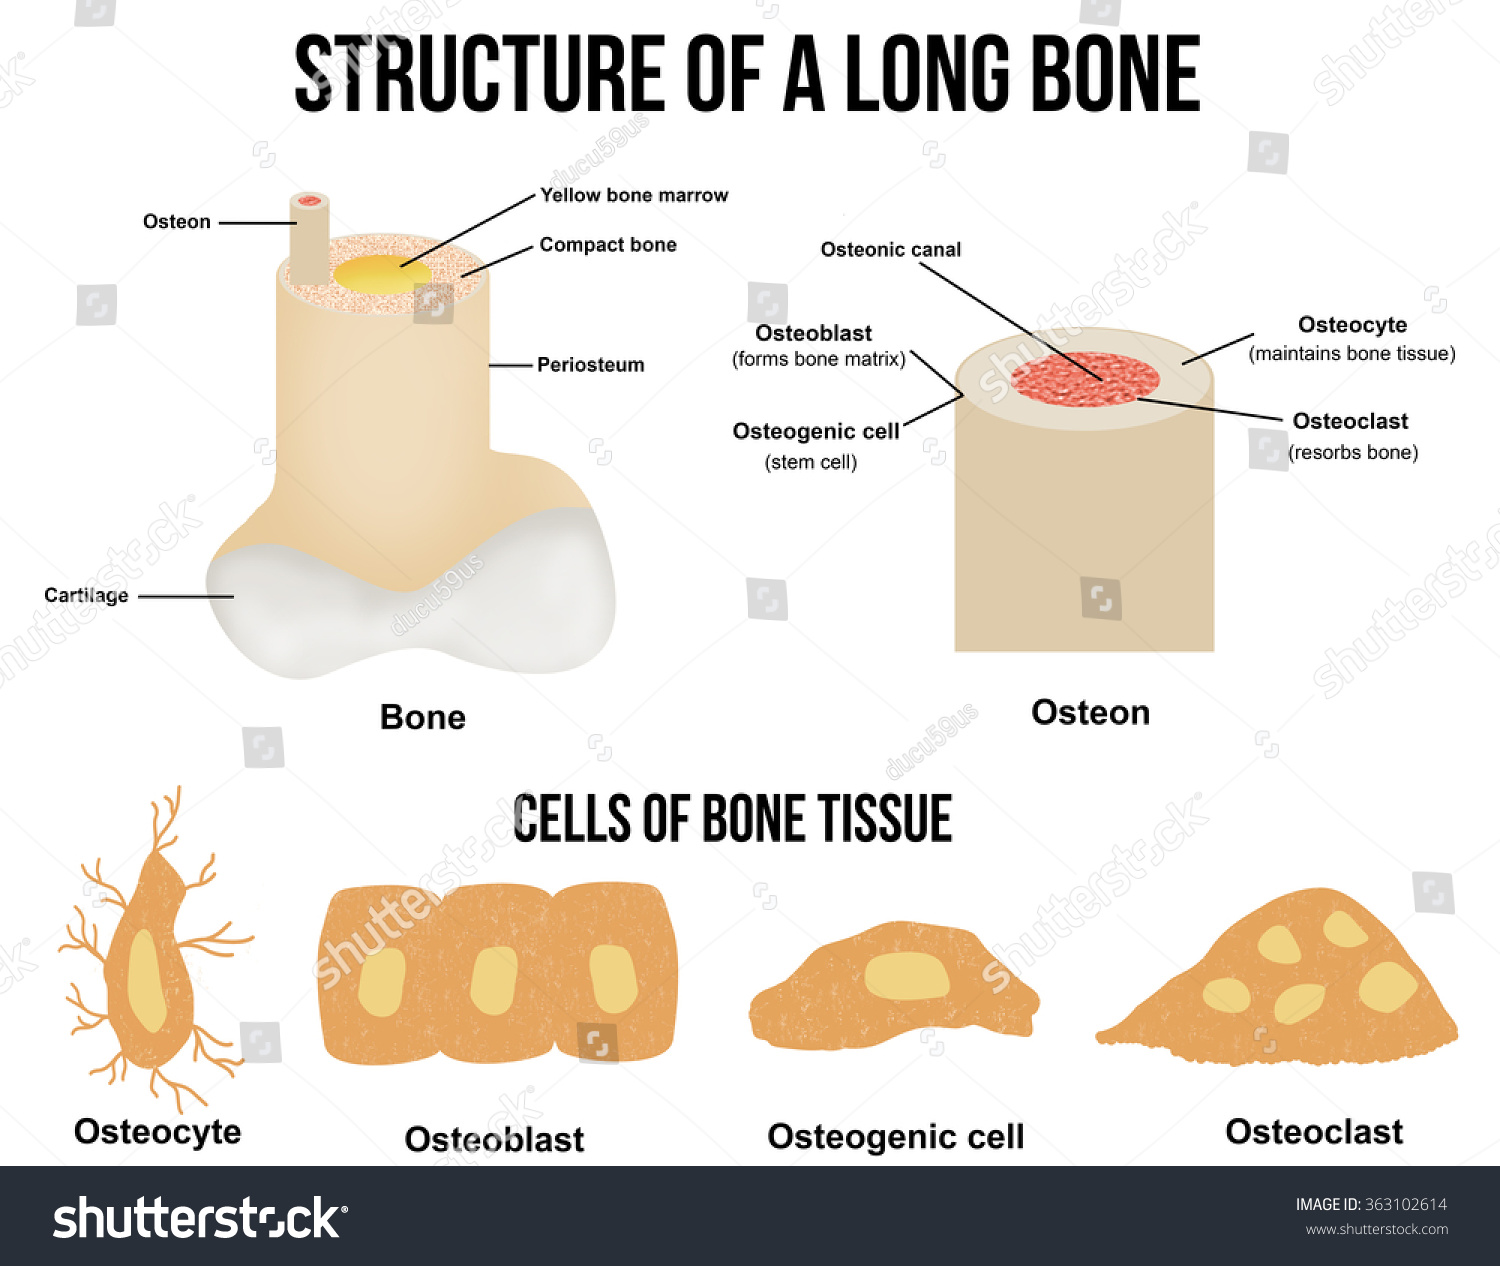 What is bone tissue made up of? - proquestyamaha.web.fc2.com